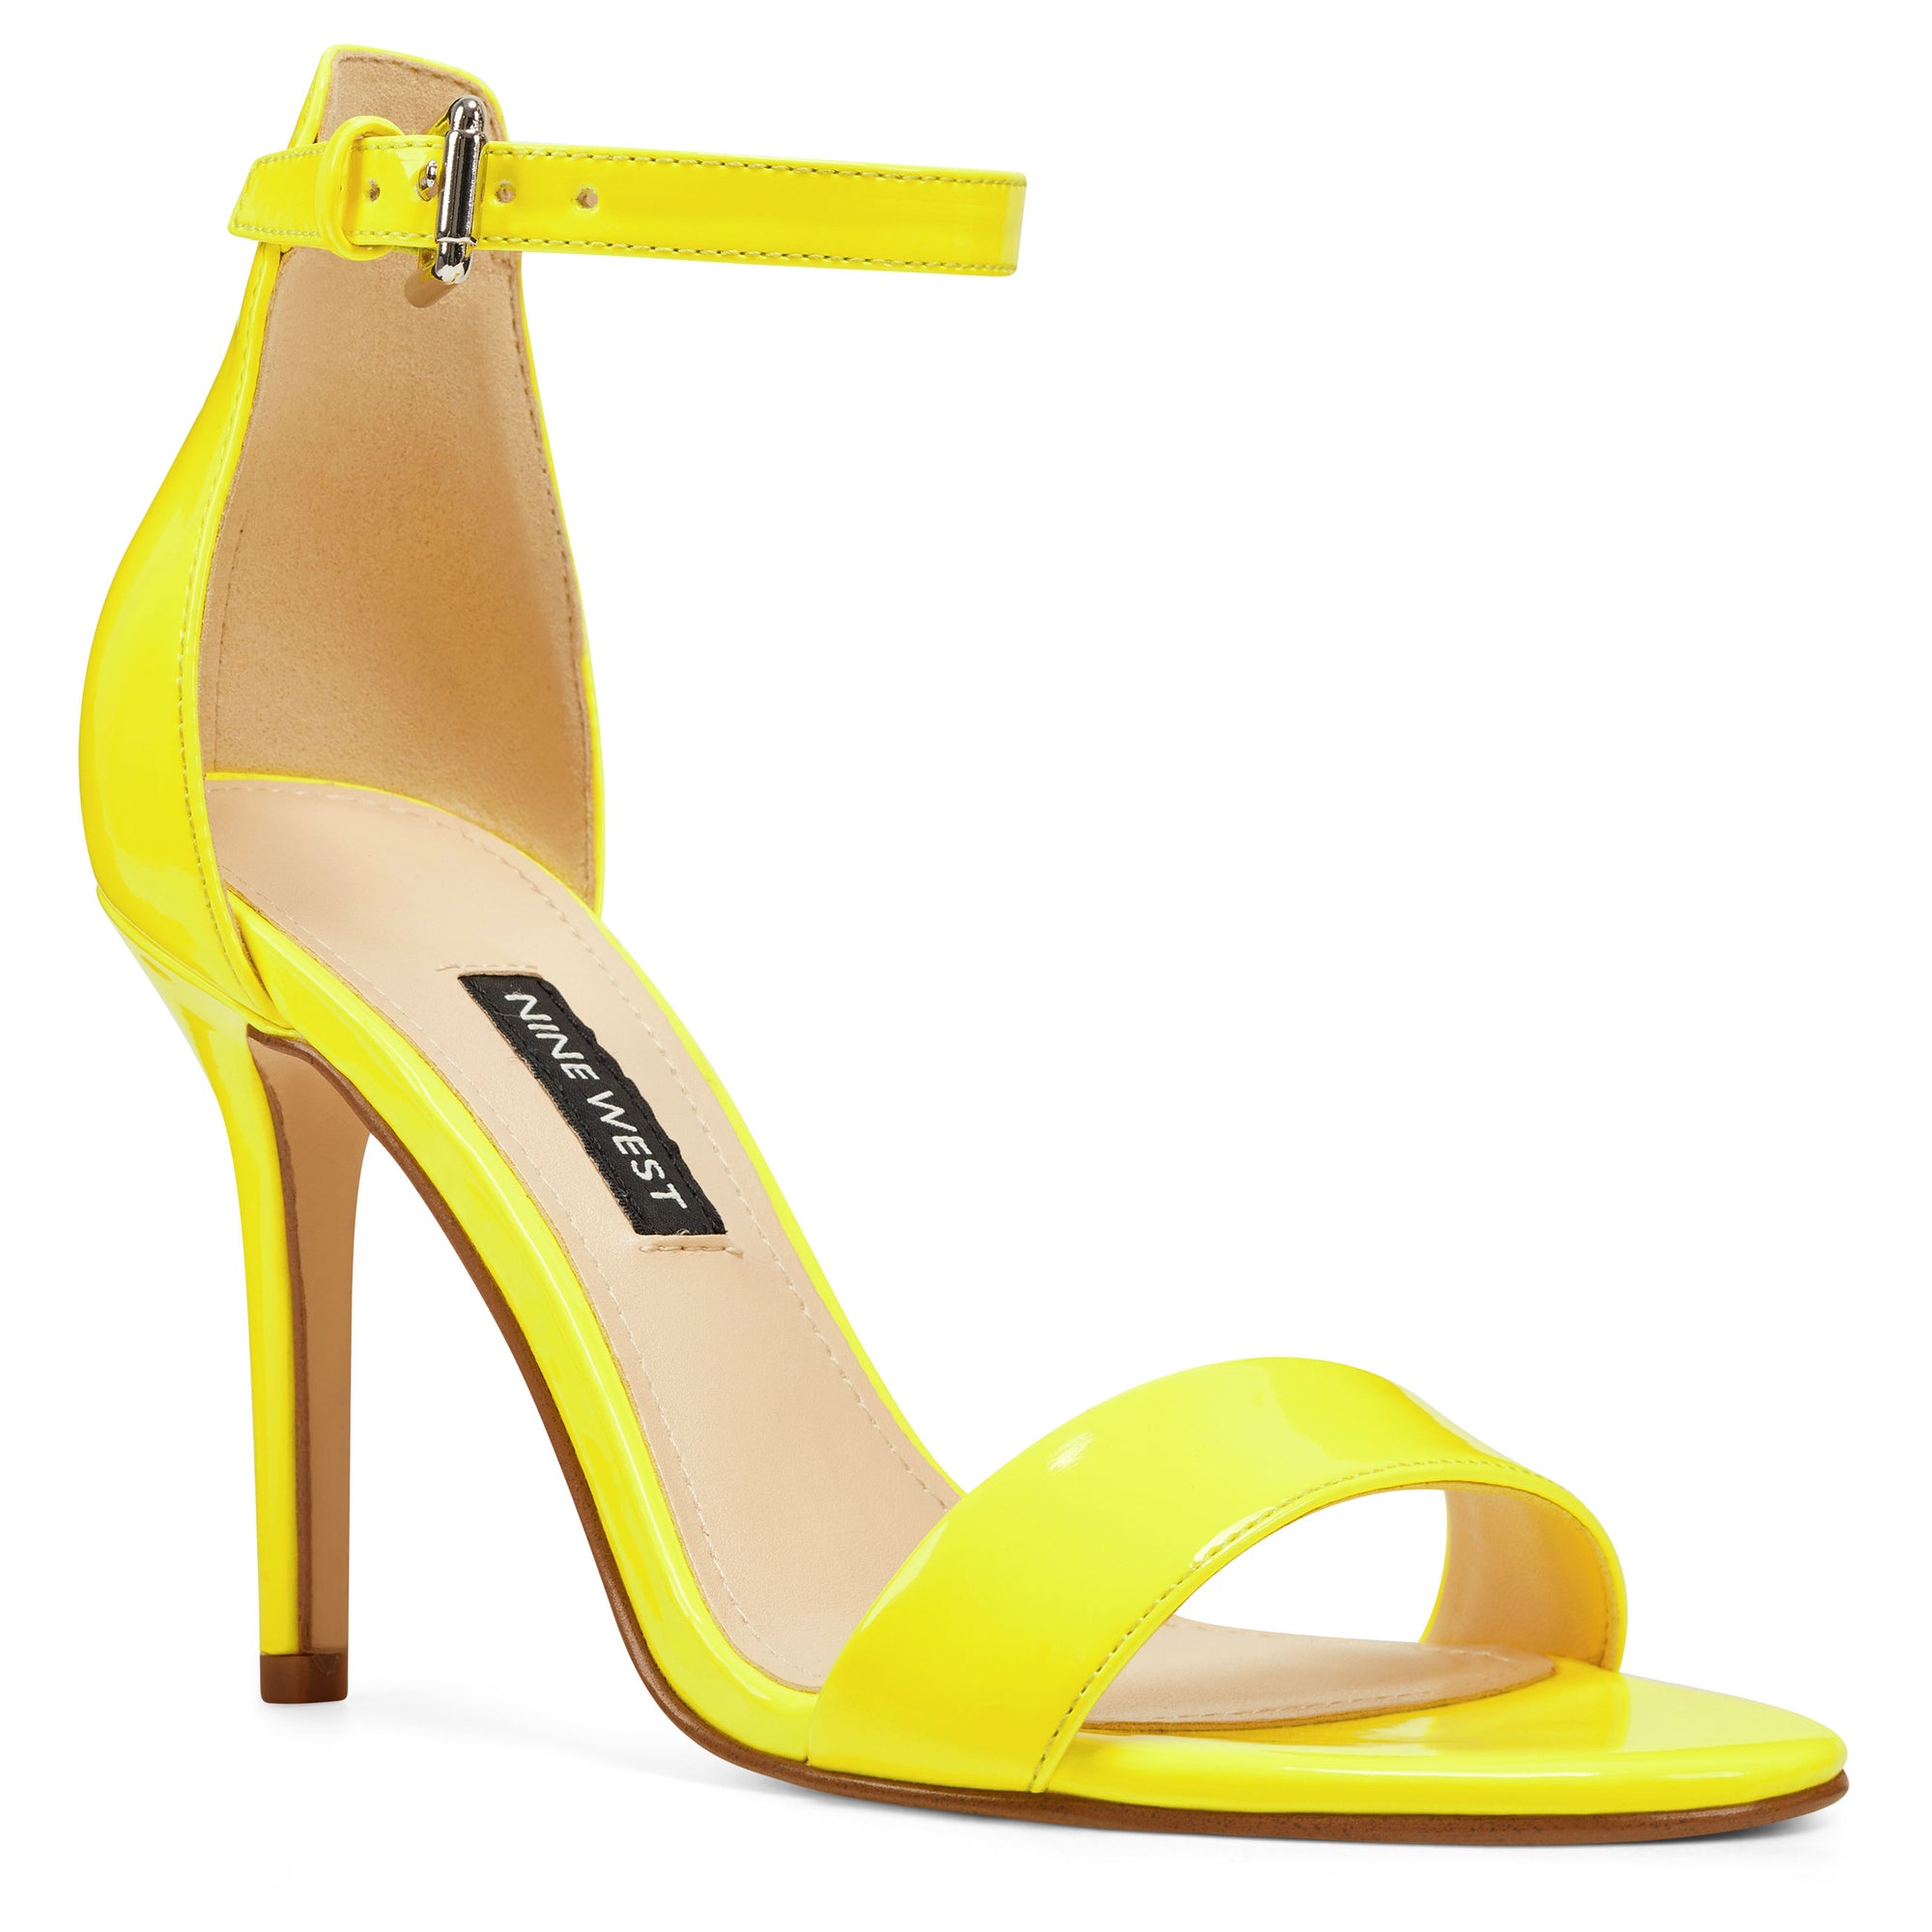 neon yellow strappy sandals